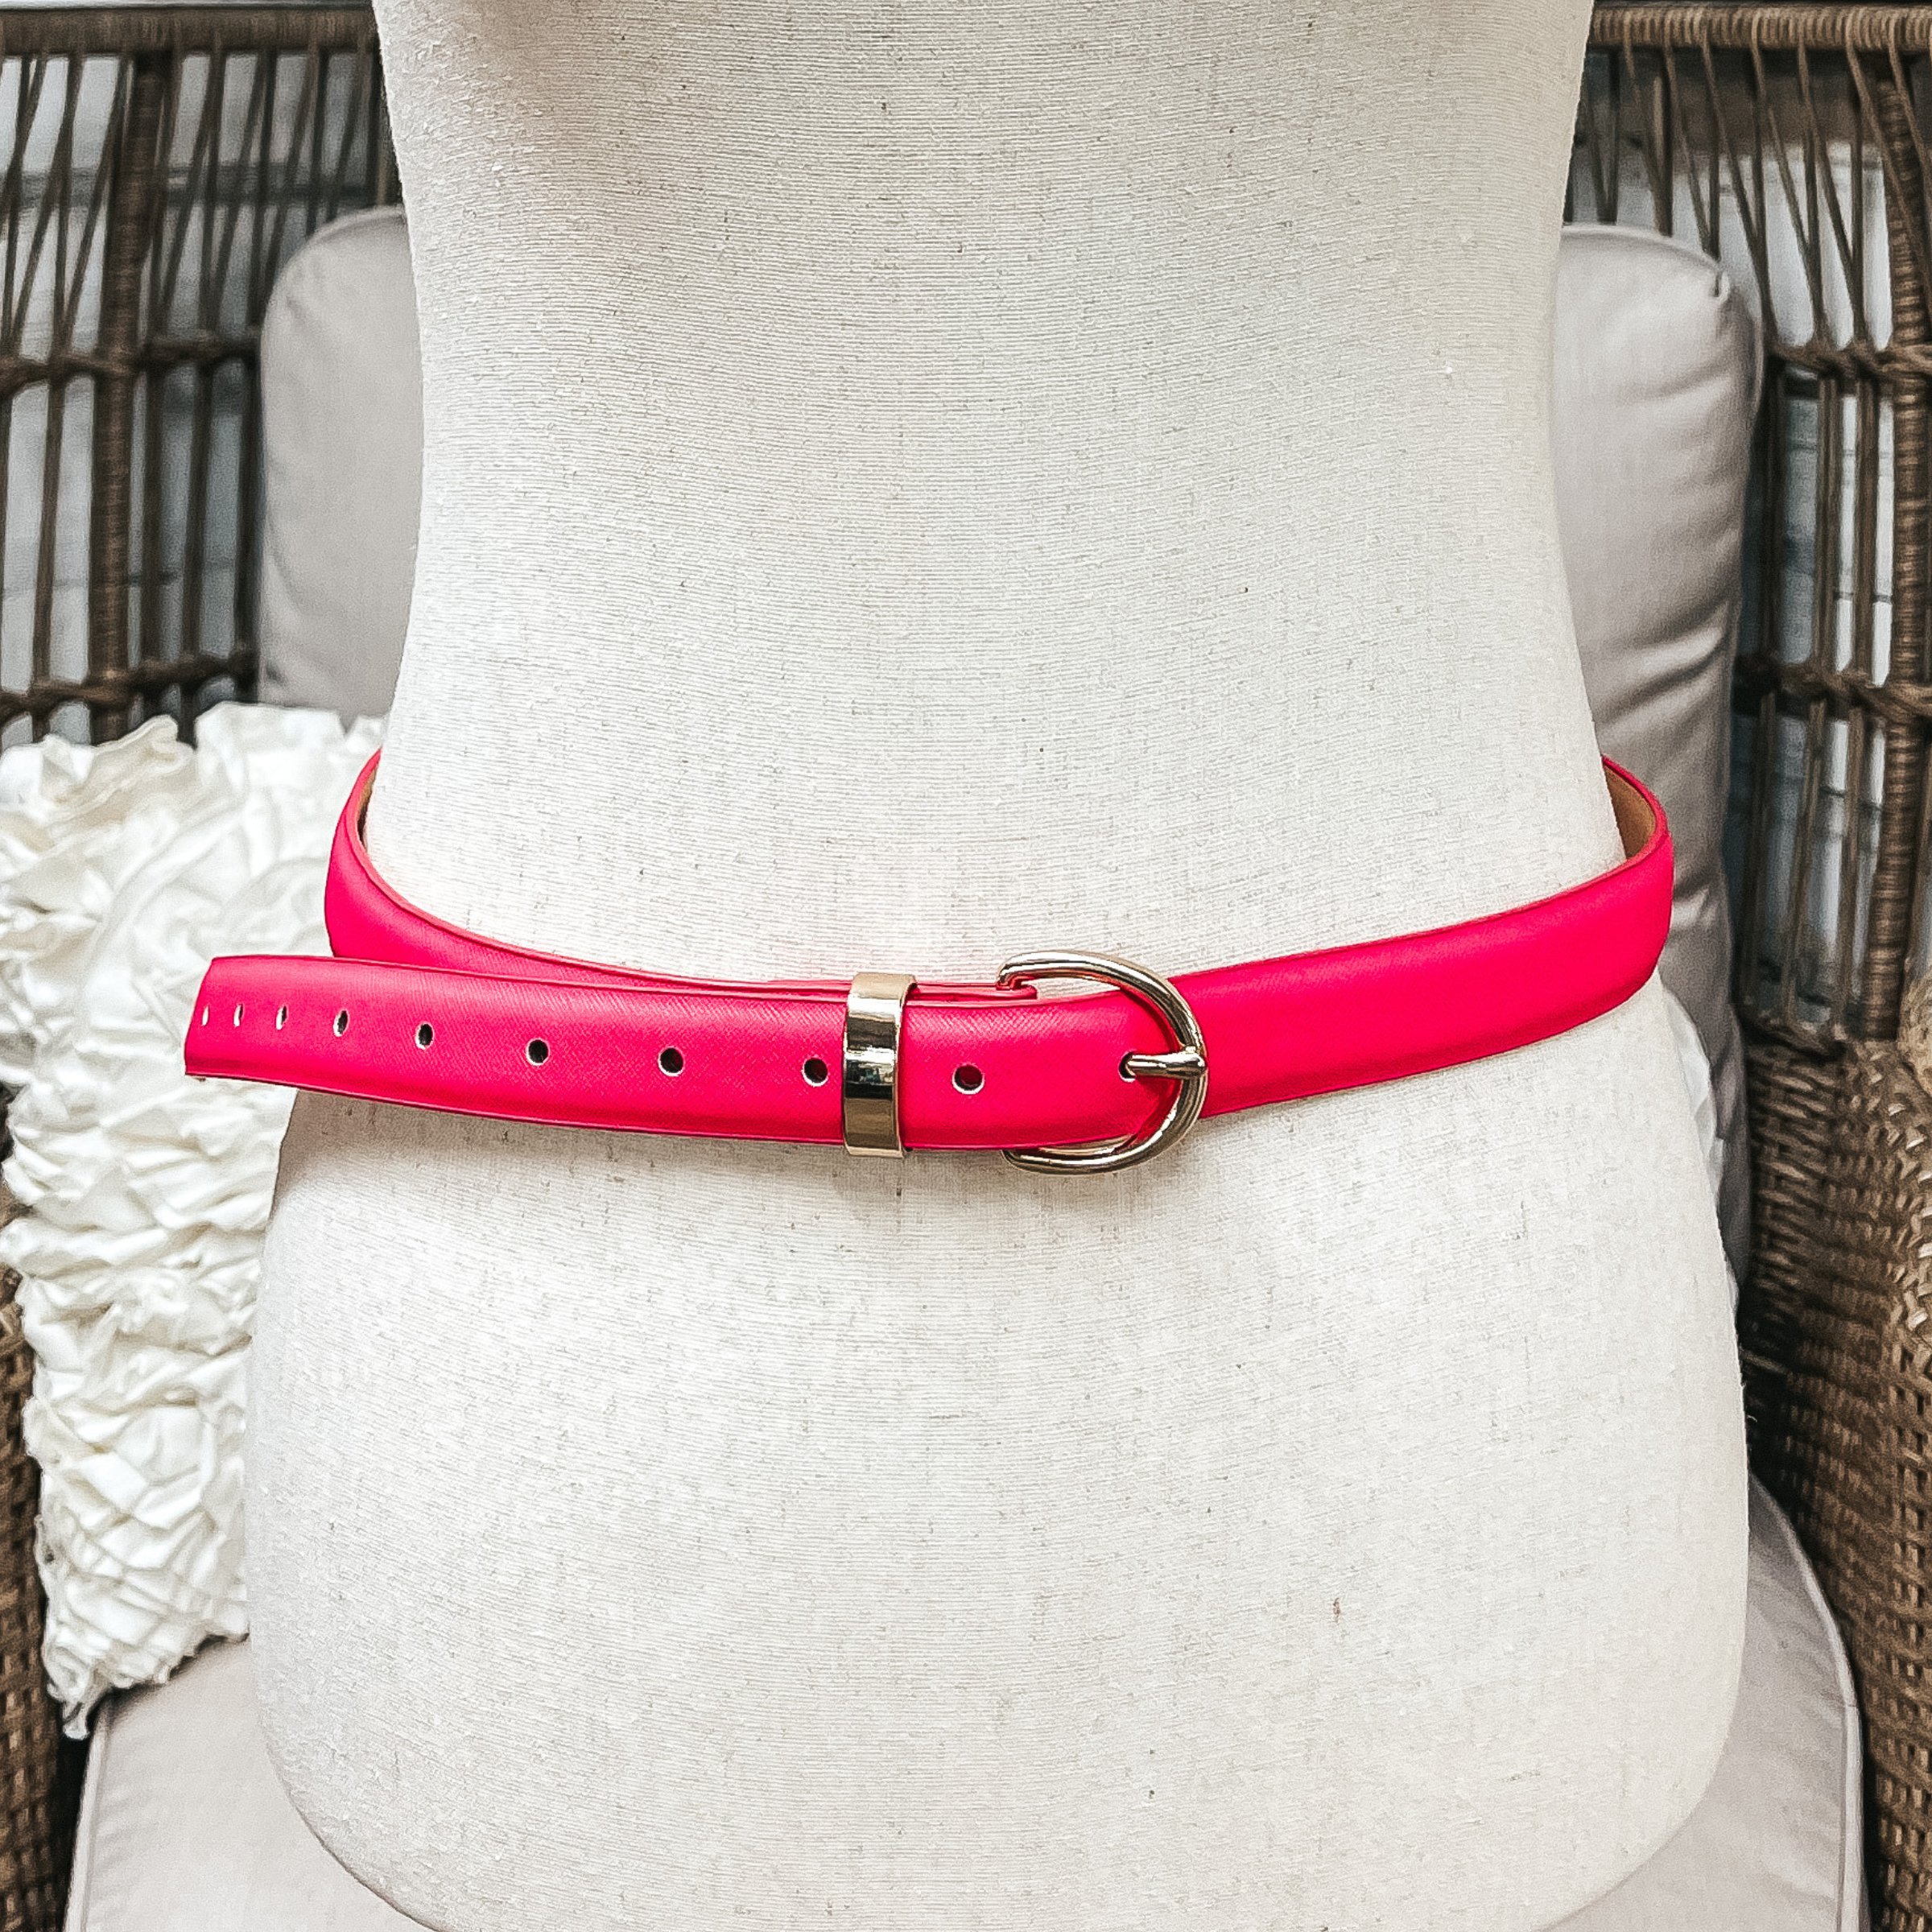 There is one skinny belt in hot pink with a small oval buckle in gold. The belt  is placed on an ivory mannequin.